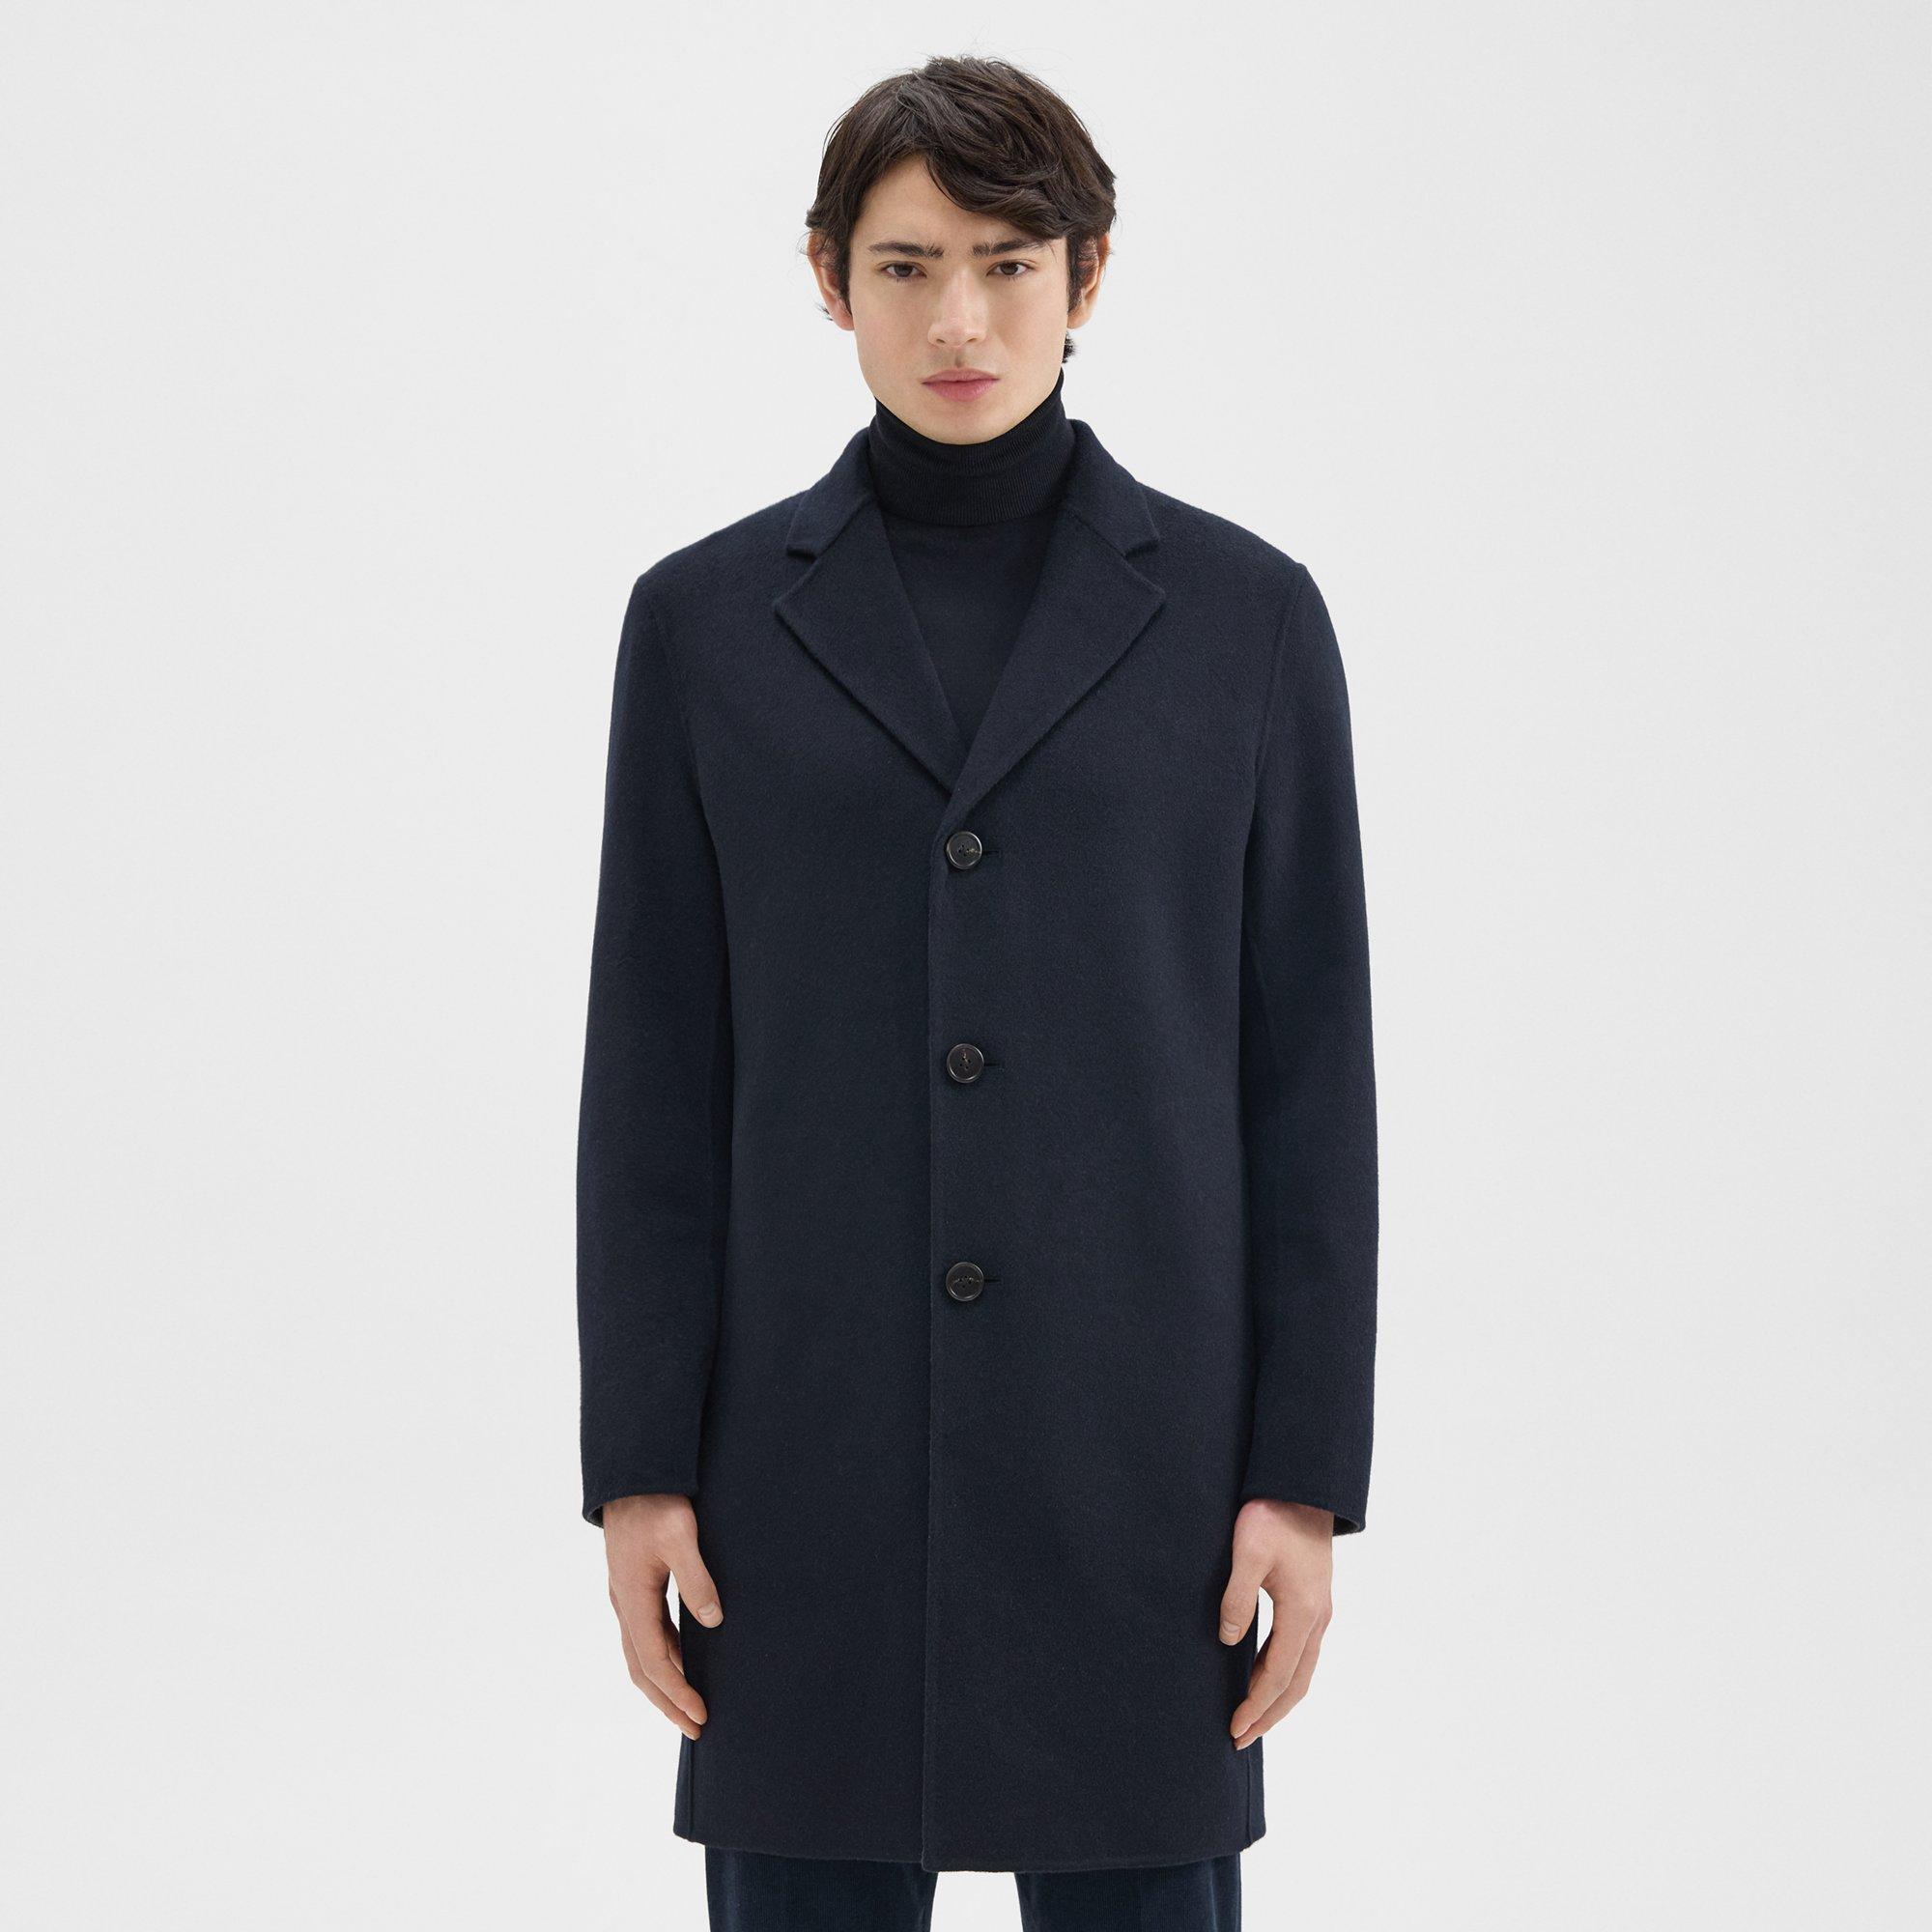 Theory Almec Coat in Double-Face Wool-Cashmere